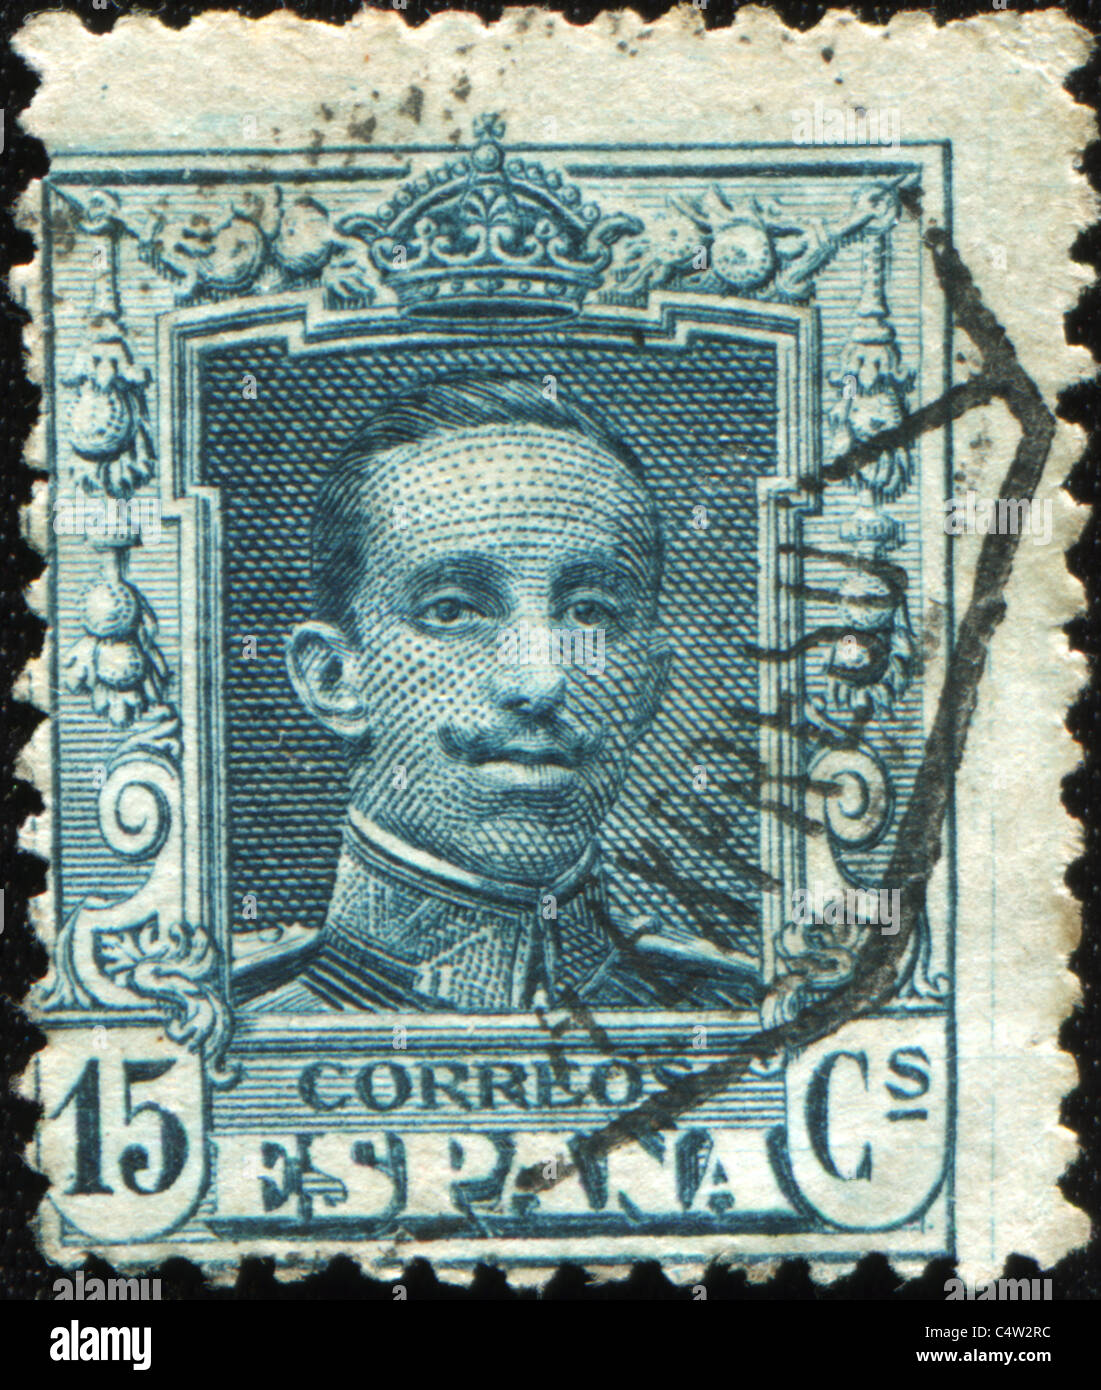 SPAIN - CIRCA 1928: A stamp printed in Spain showing king Alphonso XIII, circa 1928 Stock Photo